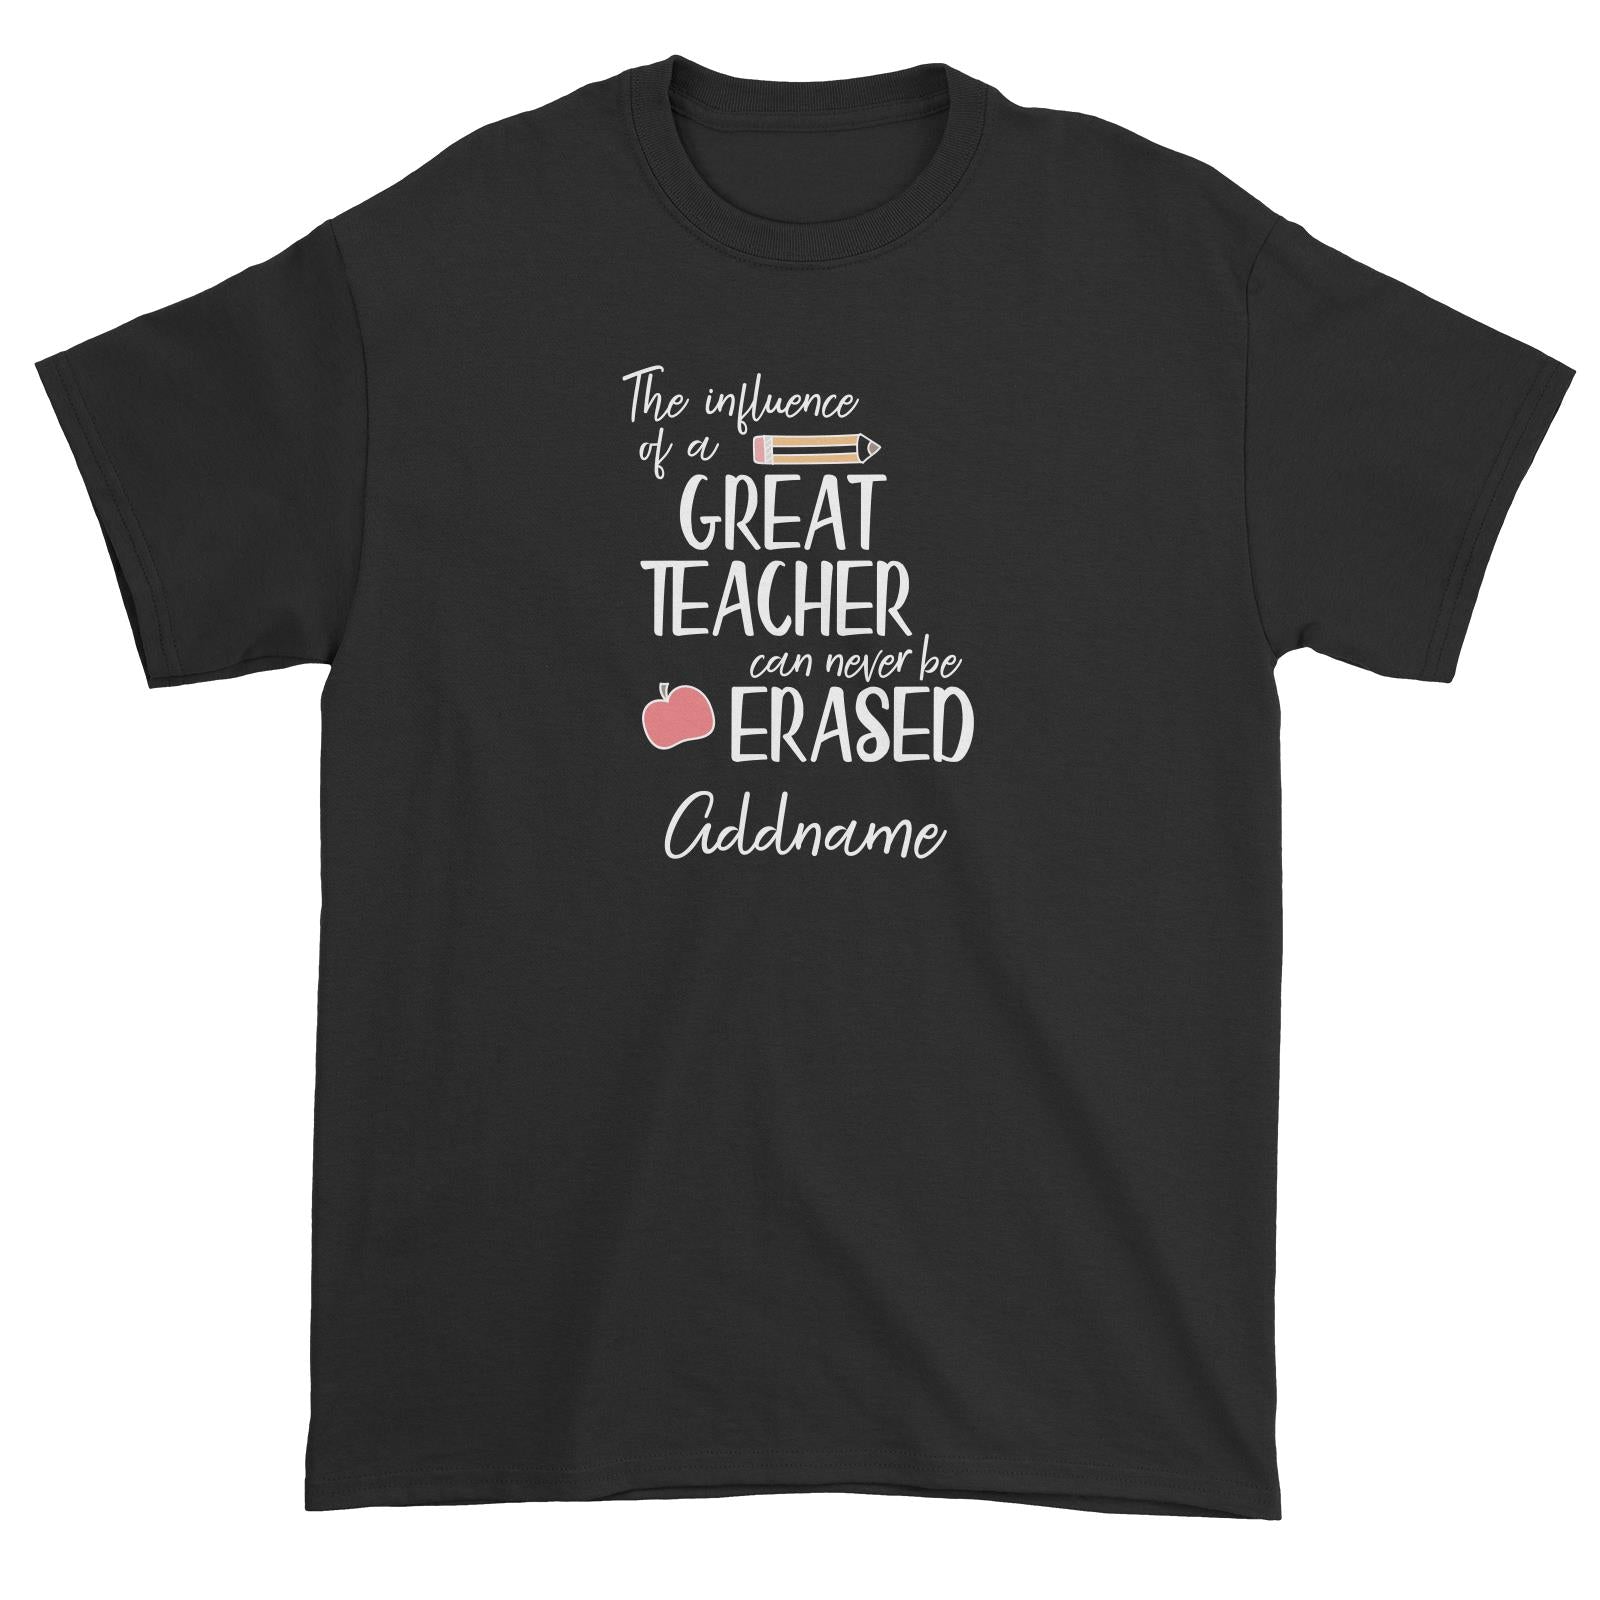 Teacher Quotes The Influence Of A Great Teacher Can Never Be Erased Addname Unisex T-Shirt